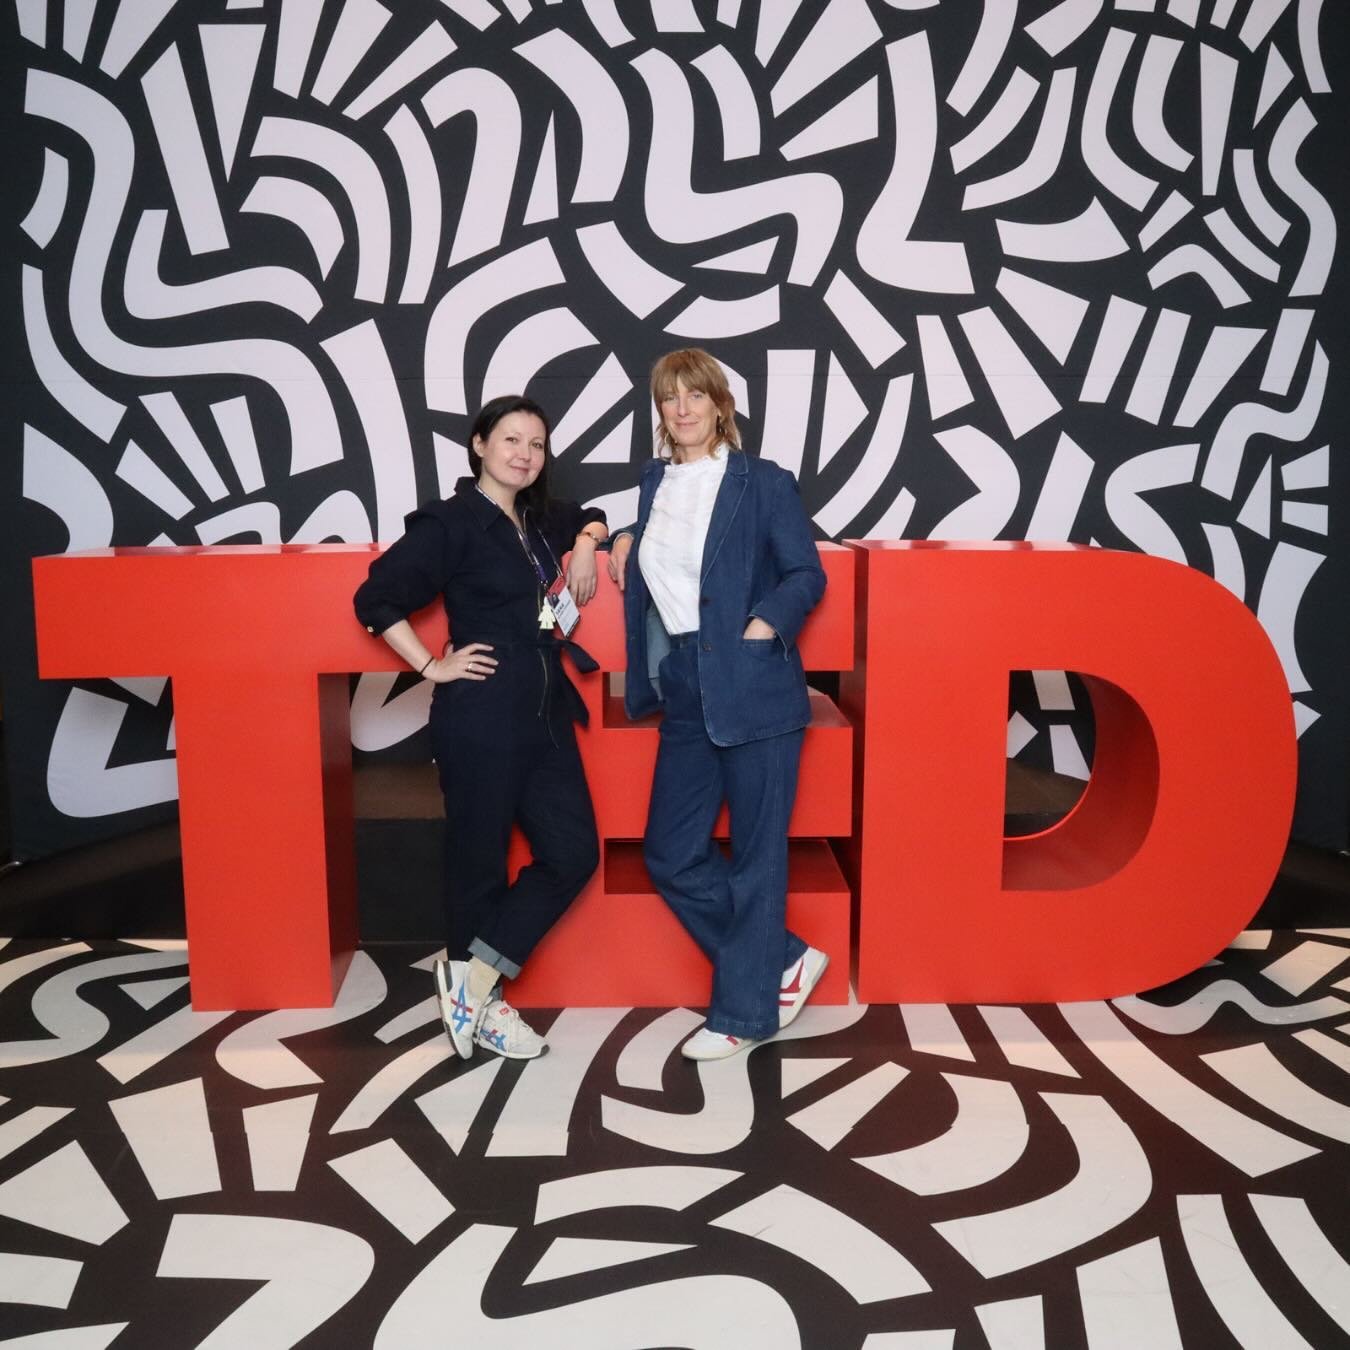 We are just back from TED!

Thrilled and so grateful to have garnered excitement and support for a couple of new visions and daring ideas, and can&rsquo;t wait to roll the proverbial sleeves here @fineacts. 

In addition, our co-founder and executive